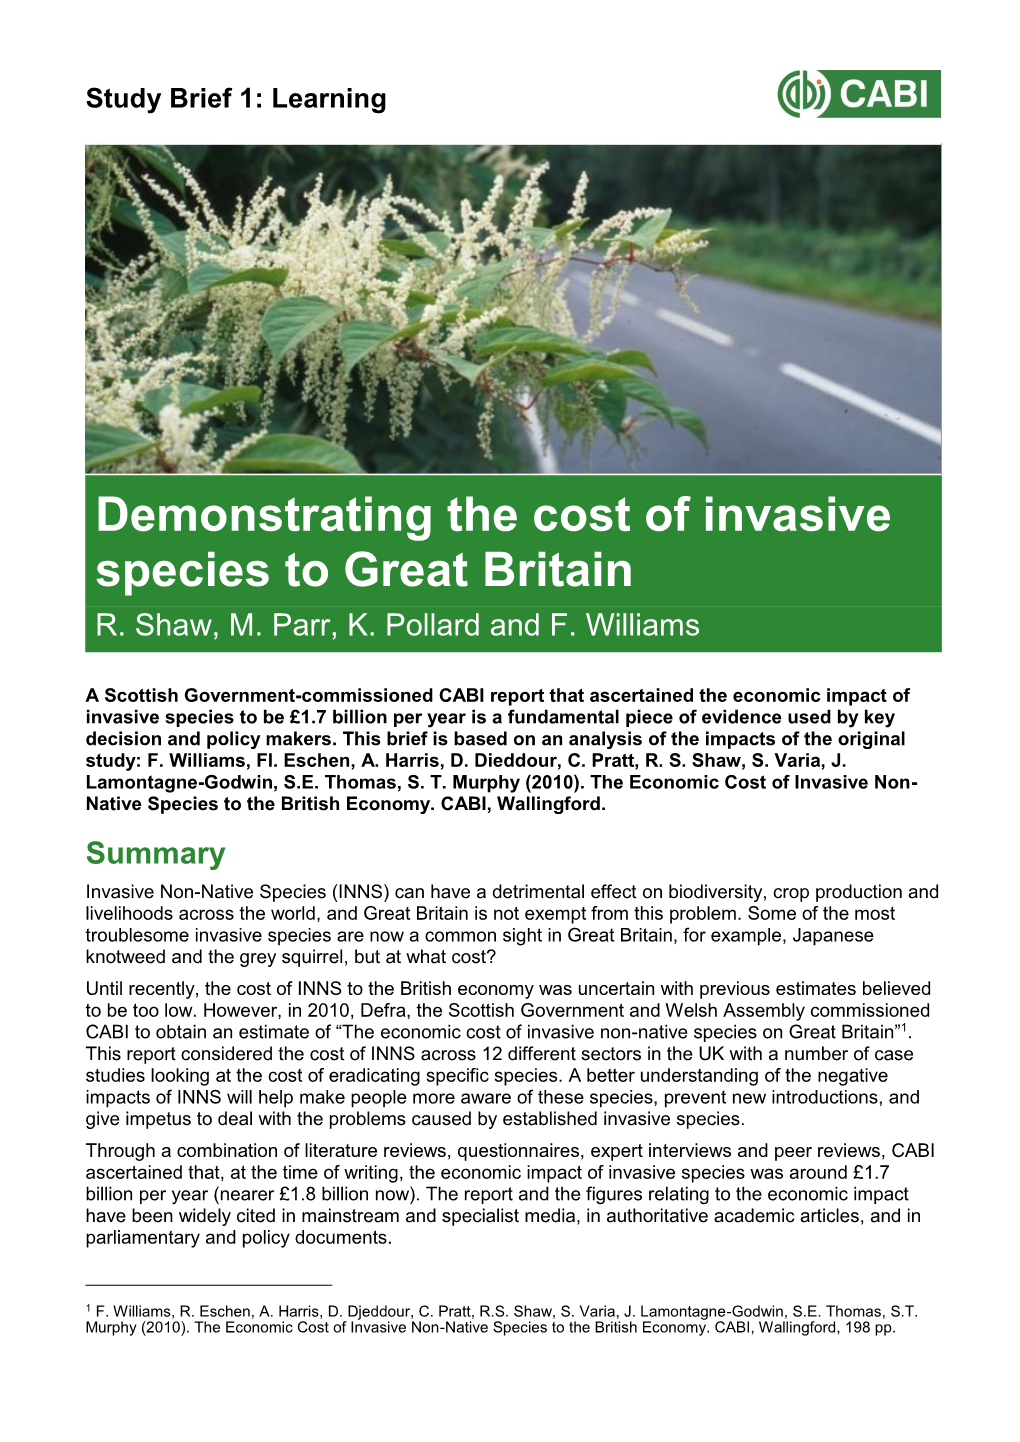 Demonstrating the Cost of Invasive Species to Great Britain R